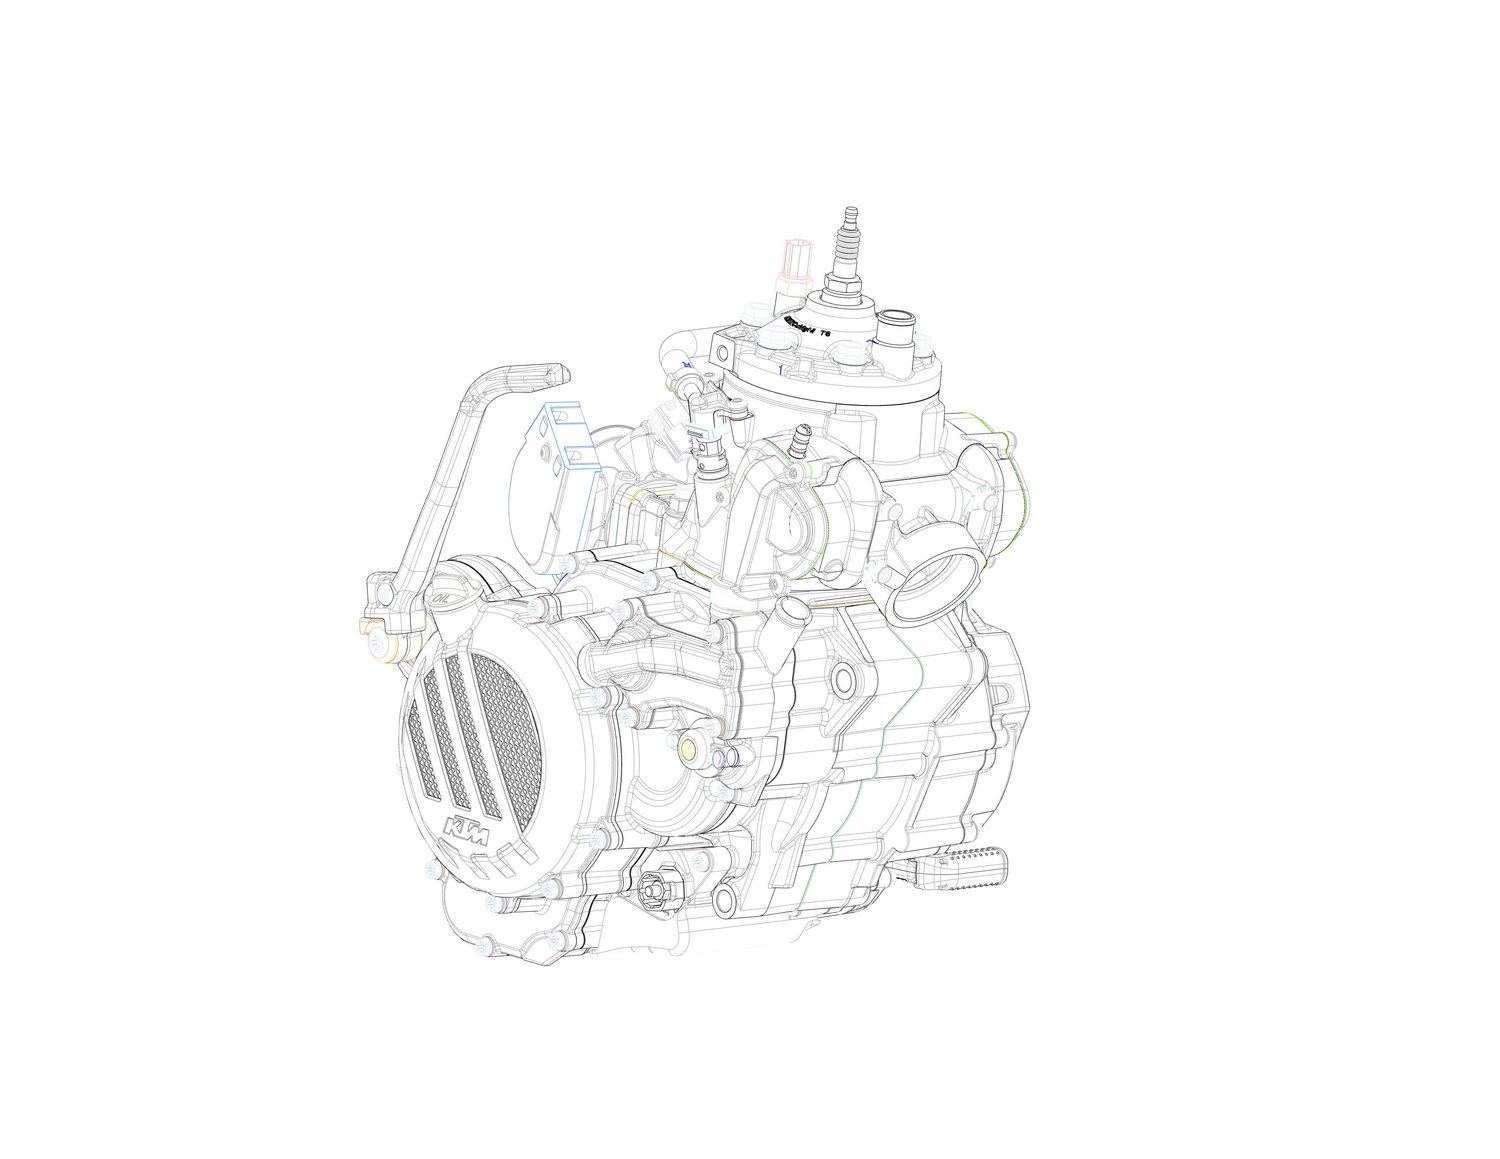 KTM Used Fuel Injection to Revamp Two-Stroke Engines